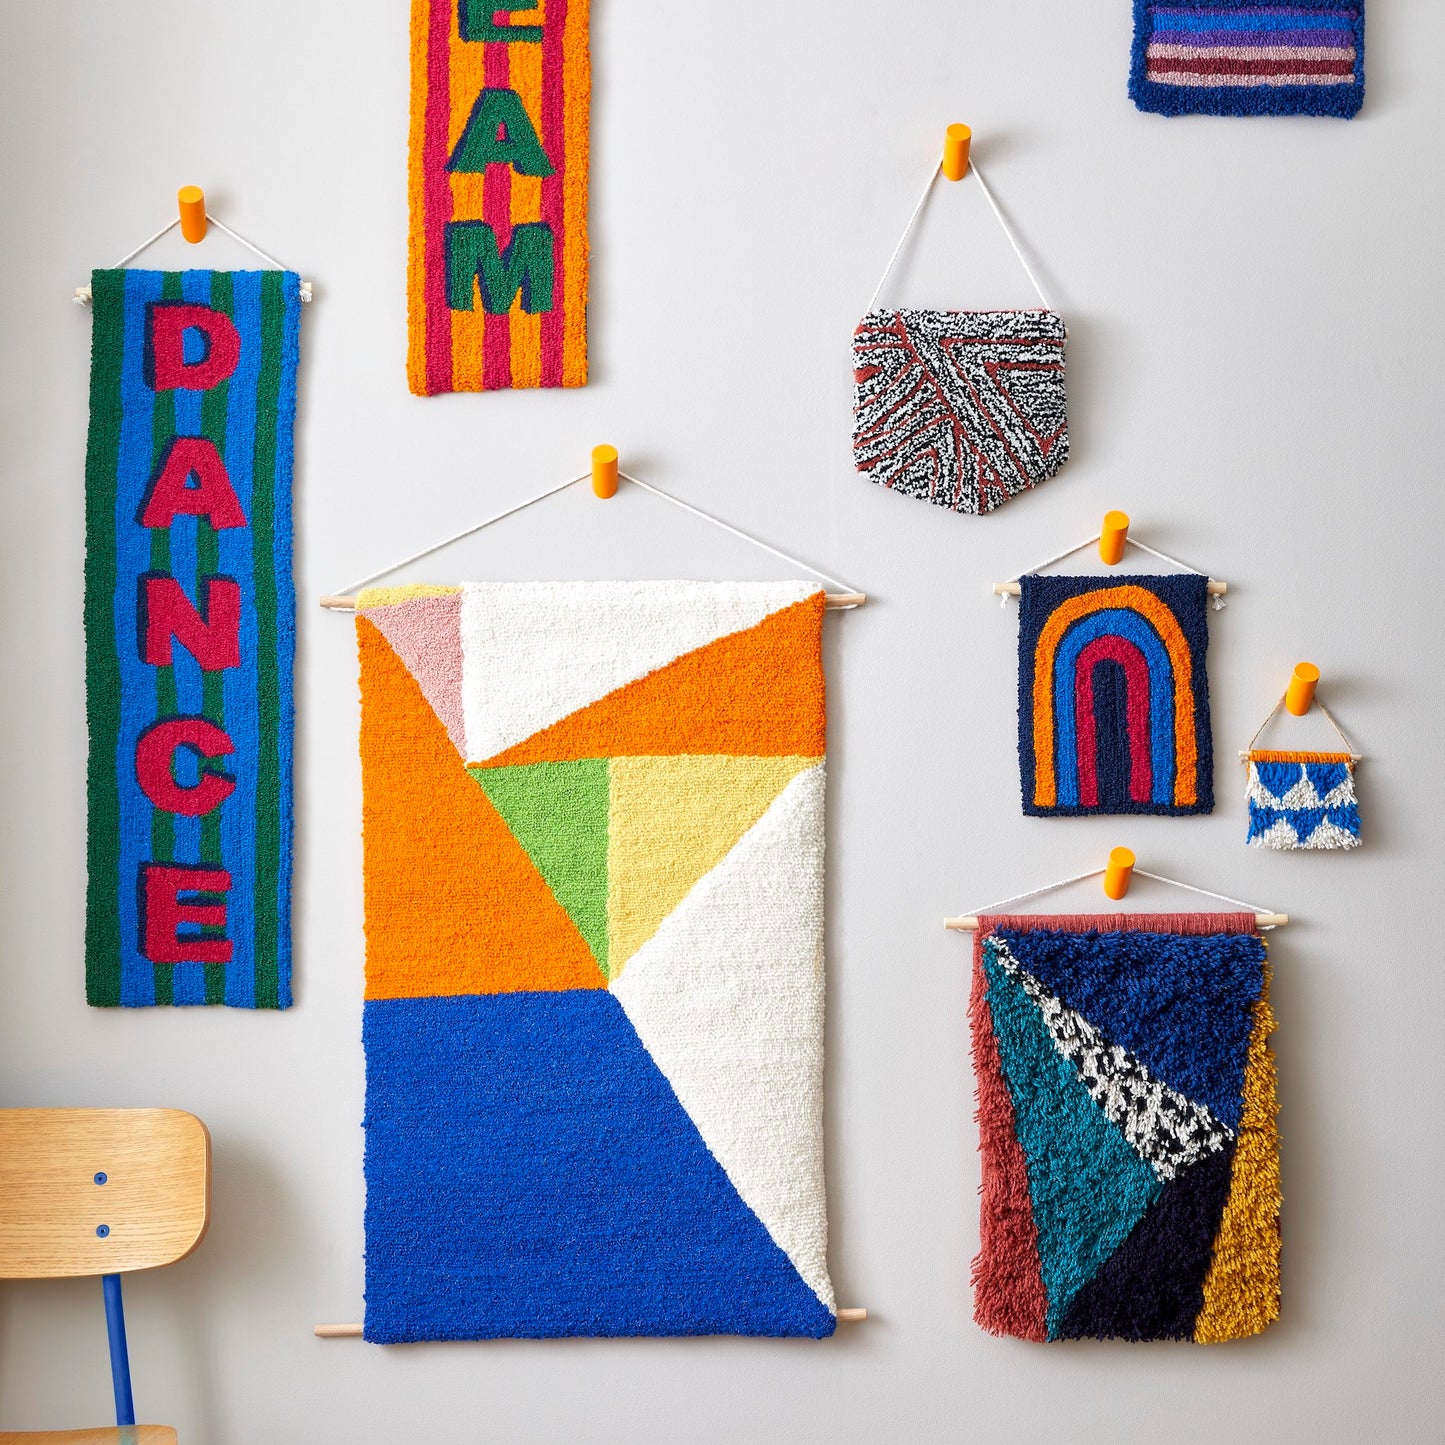 A loop pile tufted wall hanging in navy, orange, royal blue and magenta. This rainbow design has playful ‘illustrated’ edges as a part of a group image.